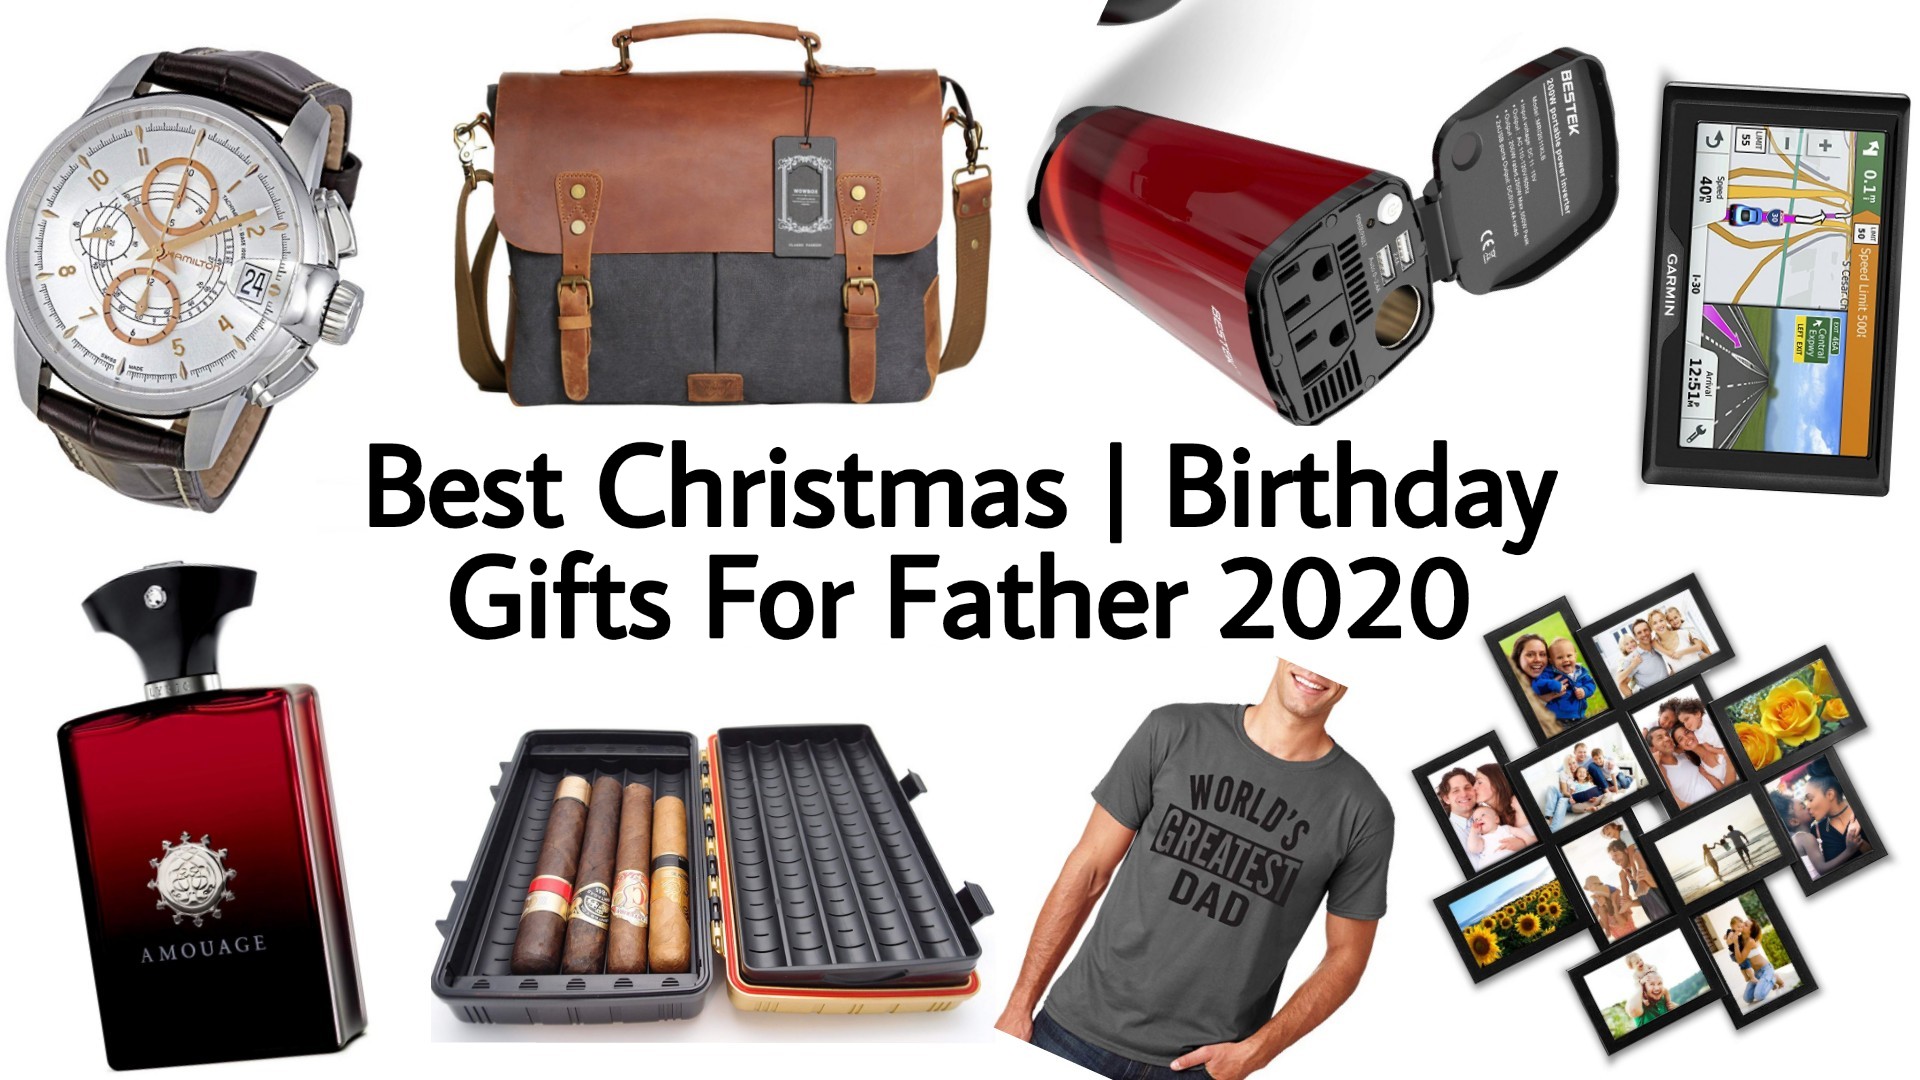 101 Best Christmas Gifts For Dad: The Ultimate List (2020)